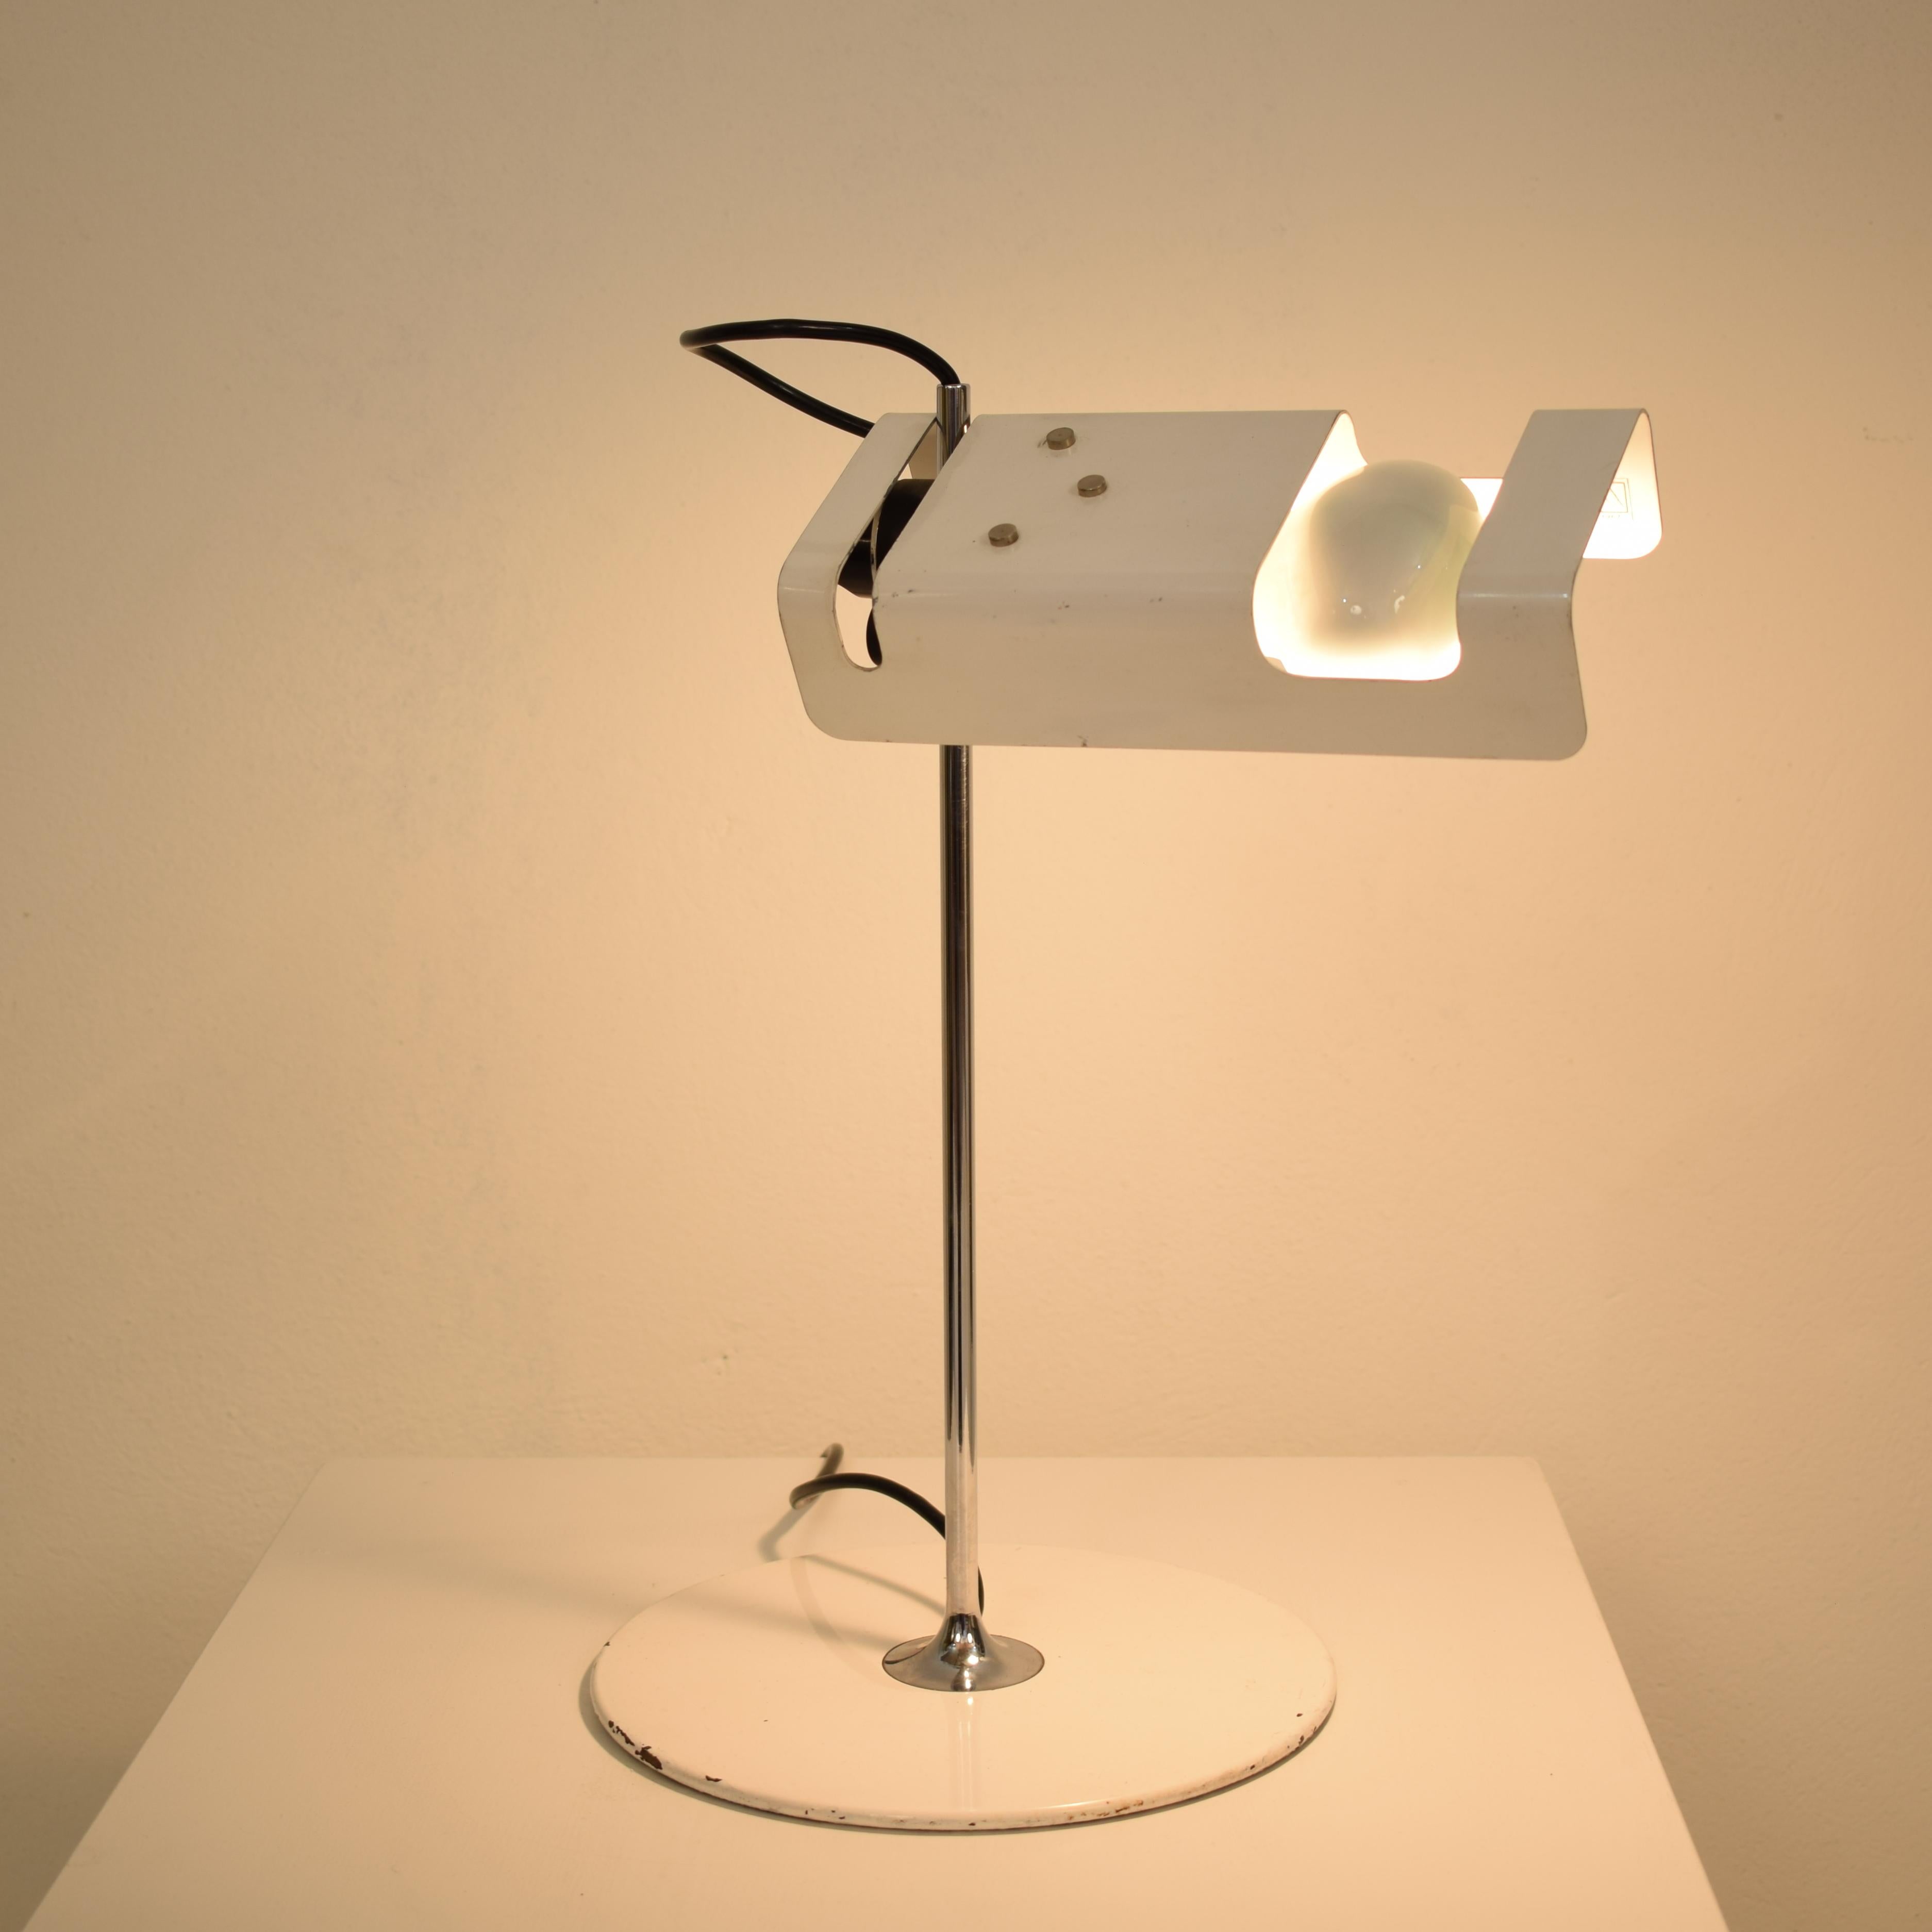 This beautiful midcentury table Lamp by Joe Colombo model #291 spider in white for Oluce in 1965. This model was made circa 1970.
This design by Joe Colombo is one of the most Minimalist Italian designs of the midcentury and an icon for the